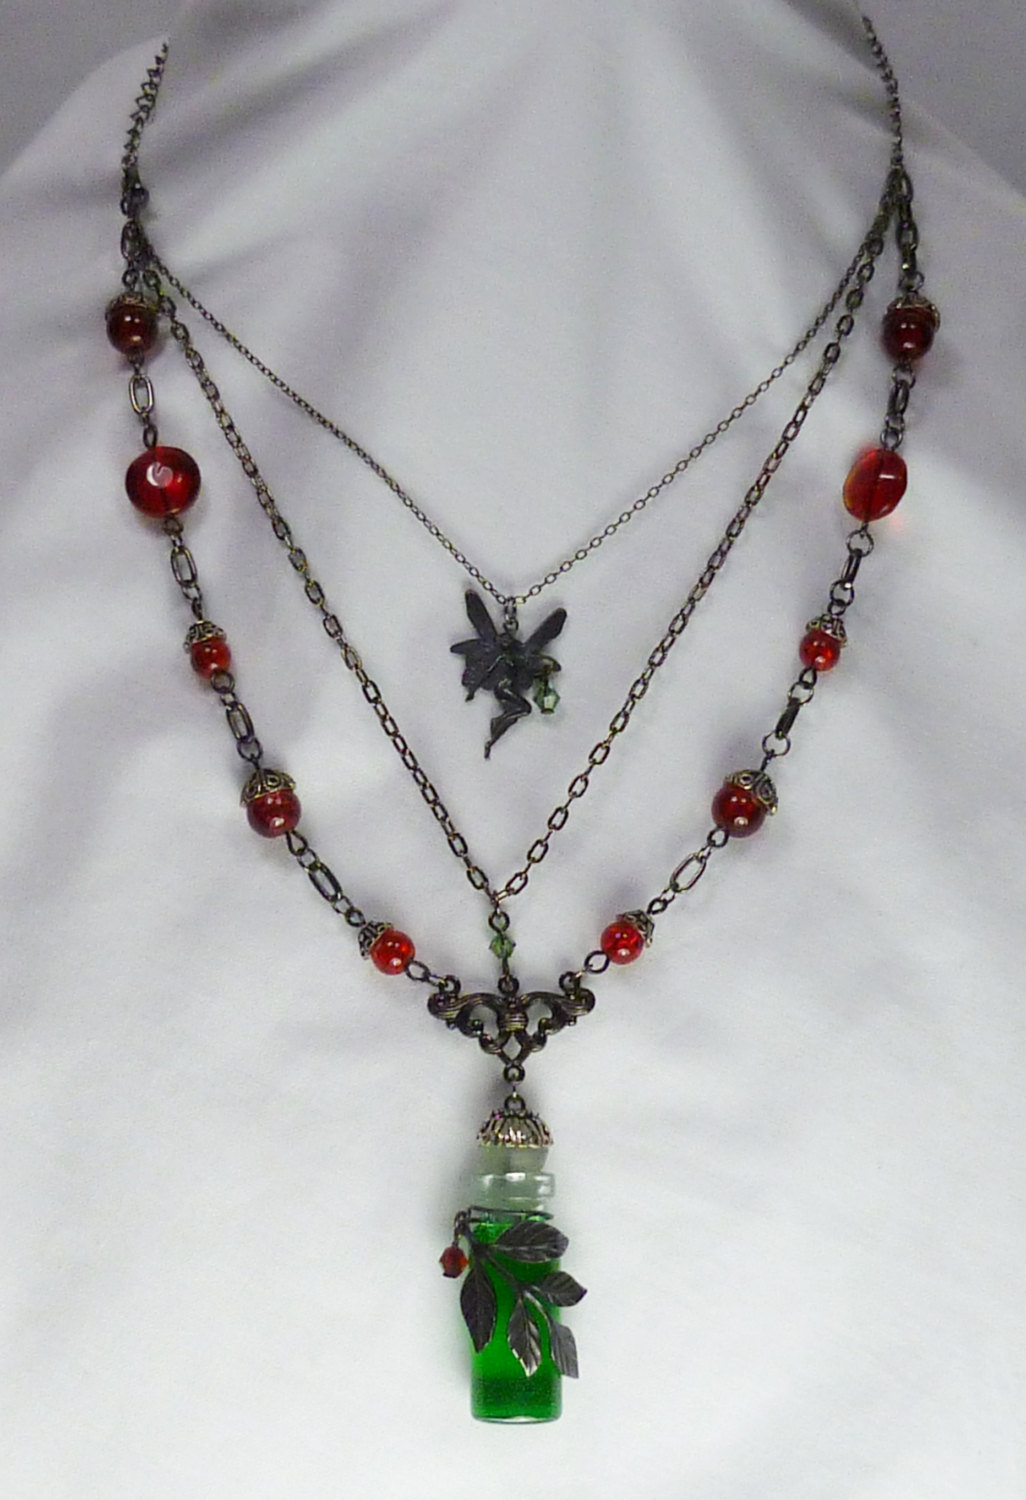 Absinthe Fairy necklace with bottle and fairy charm